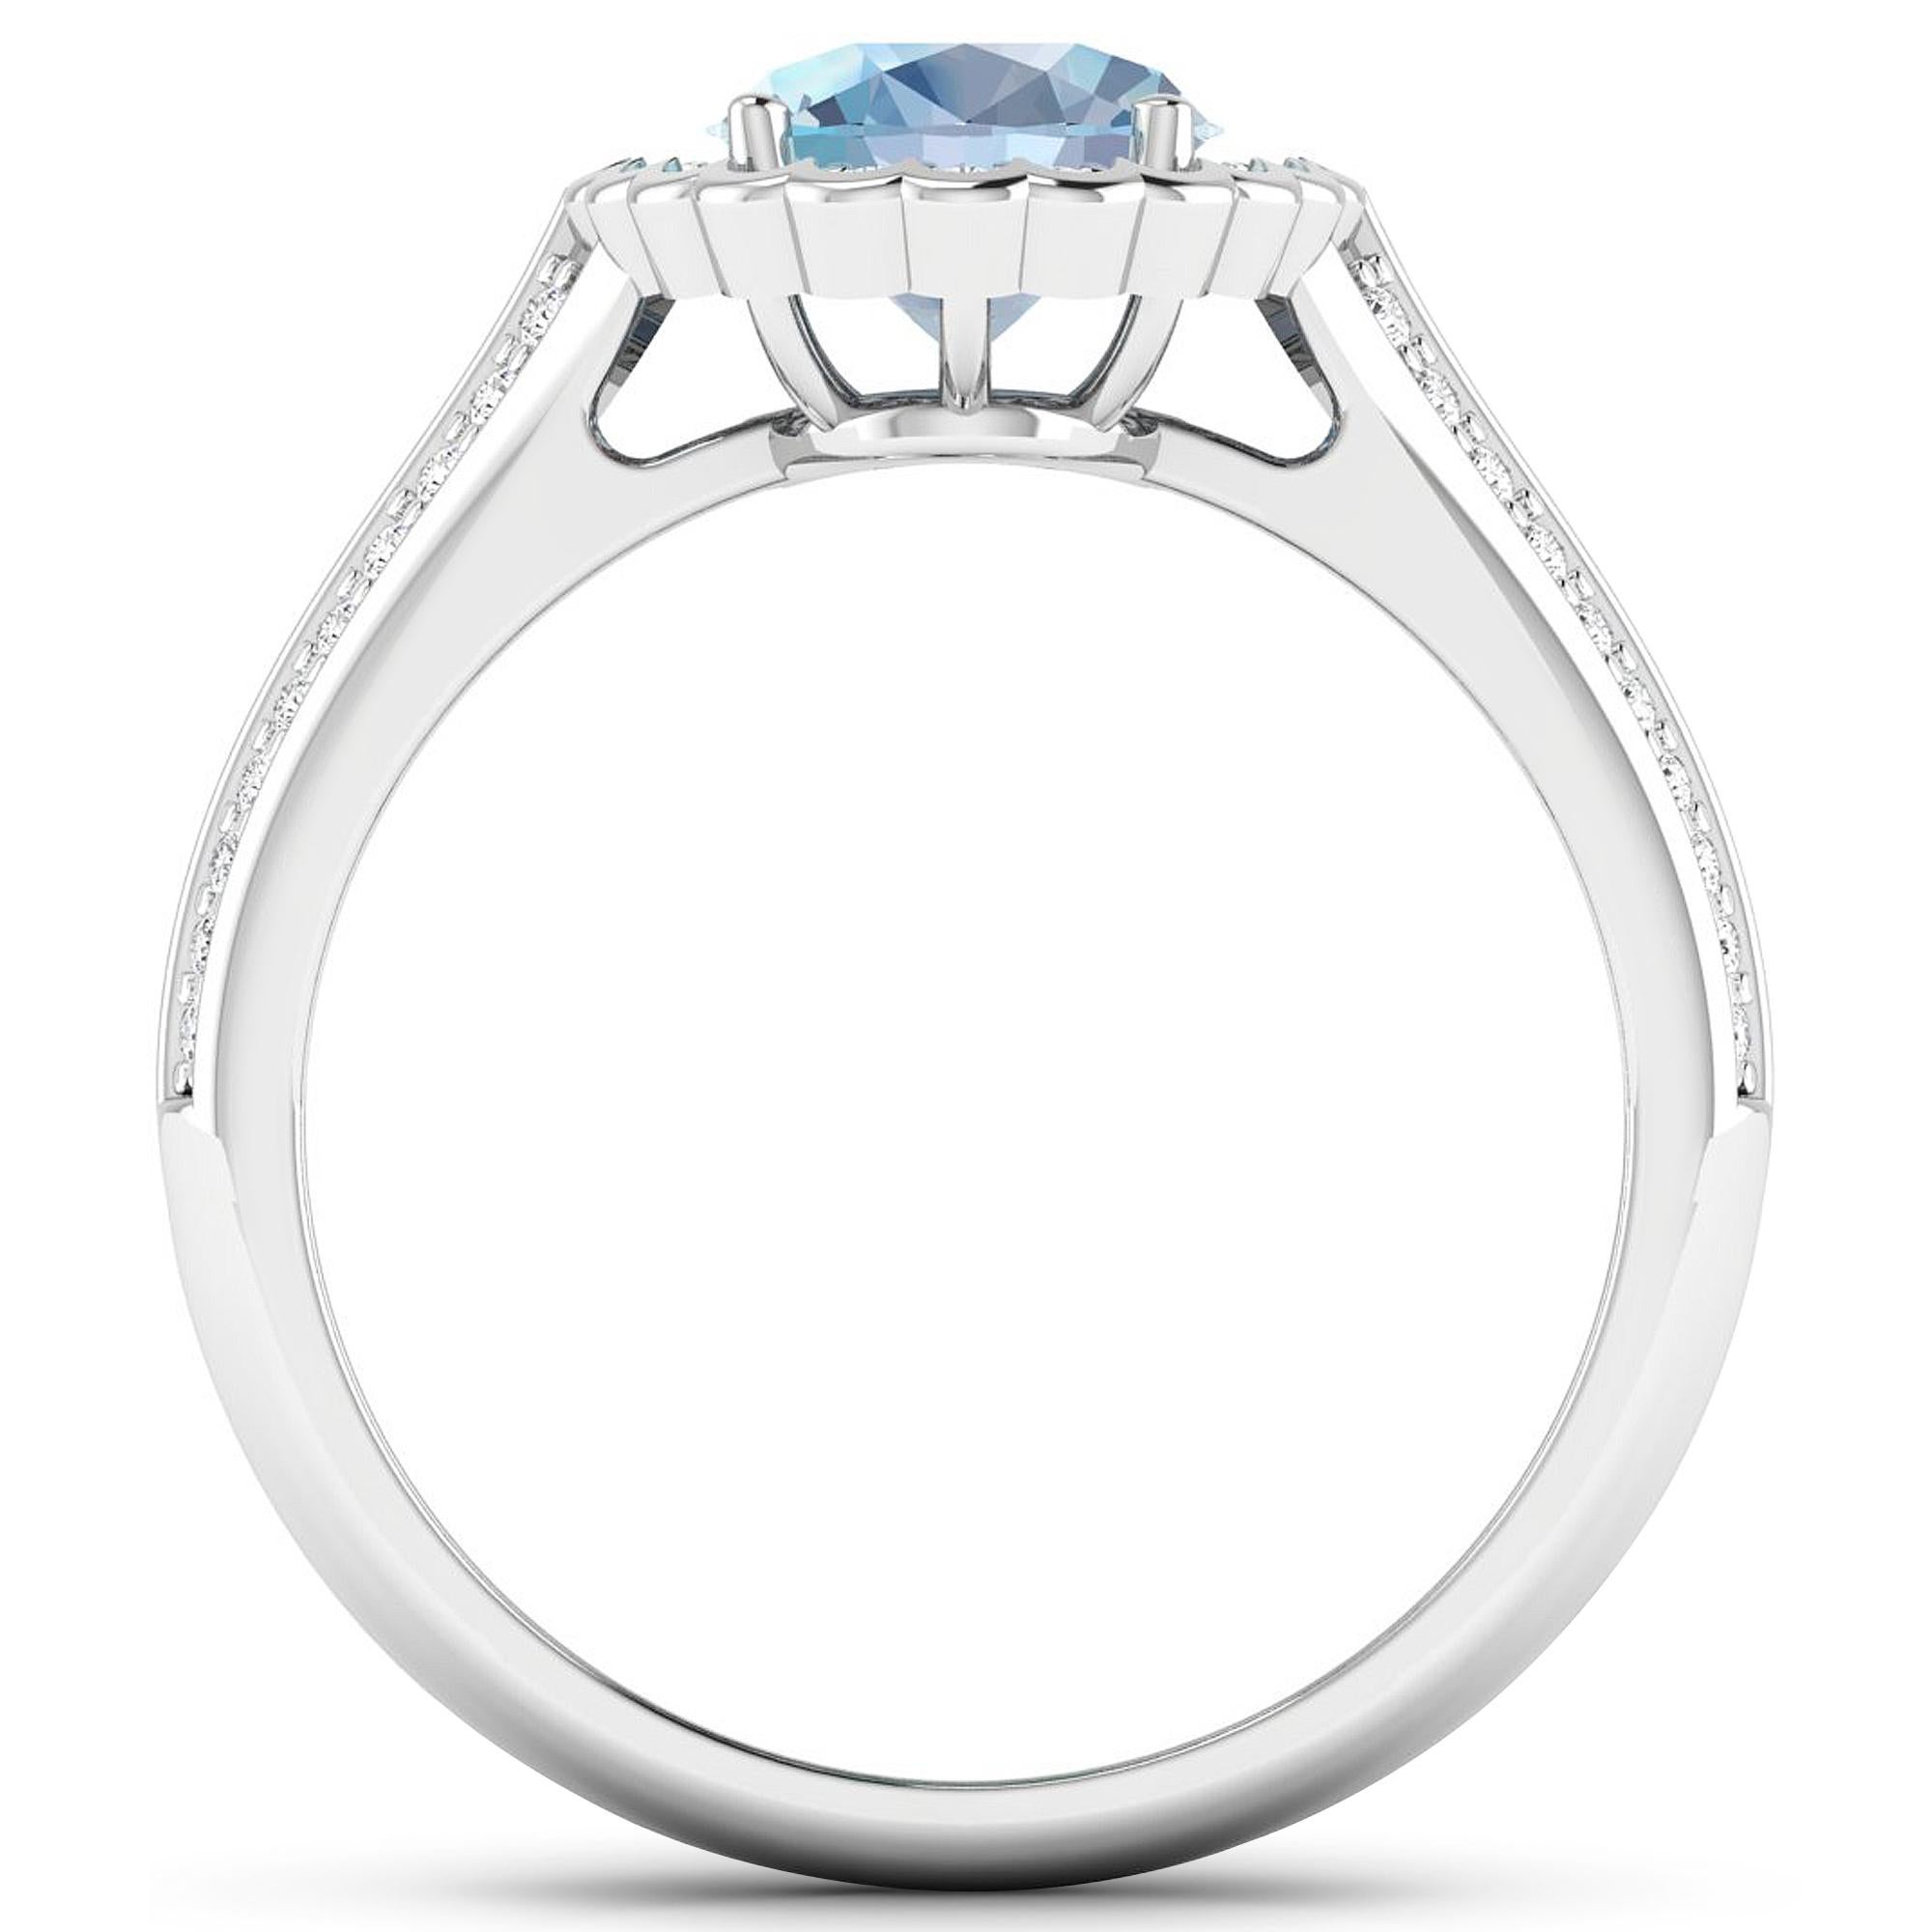 Aquamarine Gold Ring, 14Kt Gold Aquamarine & Diamond Engagement Ring, 1.82ctw.

Flaunt yourself with this 14K White Gold Aquamarine & White Diamond Engagement Ring. The setting is inlaid with 62 accented full-cut White Diamond round stones for a